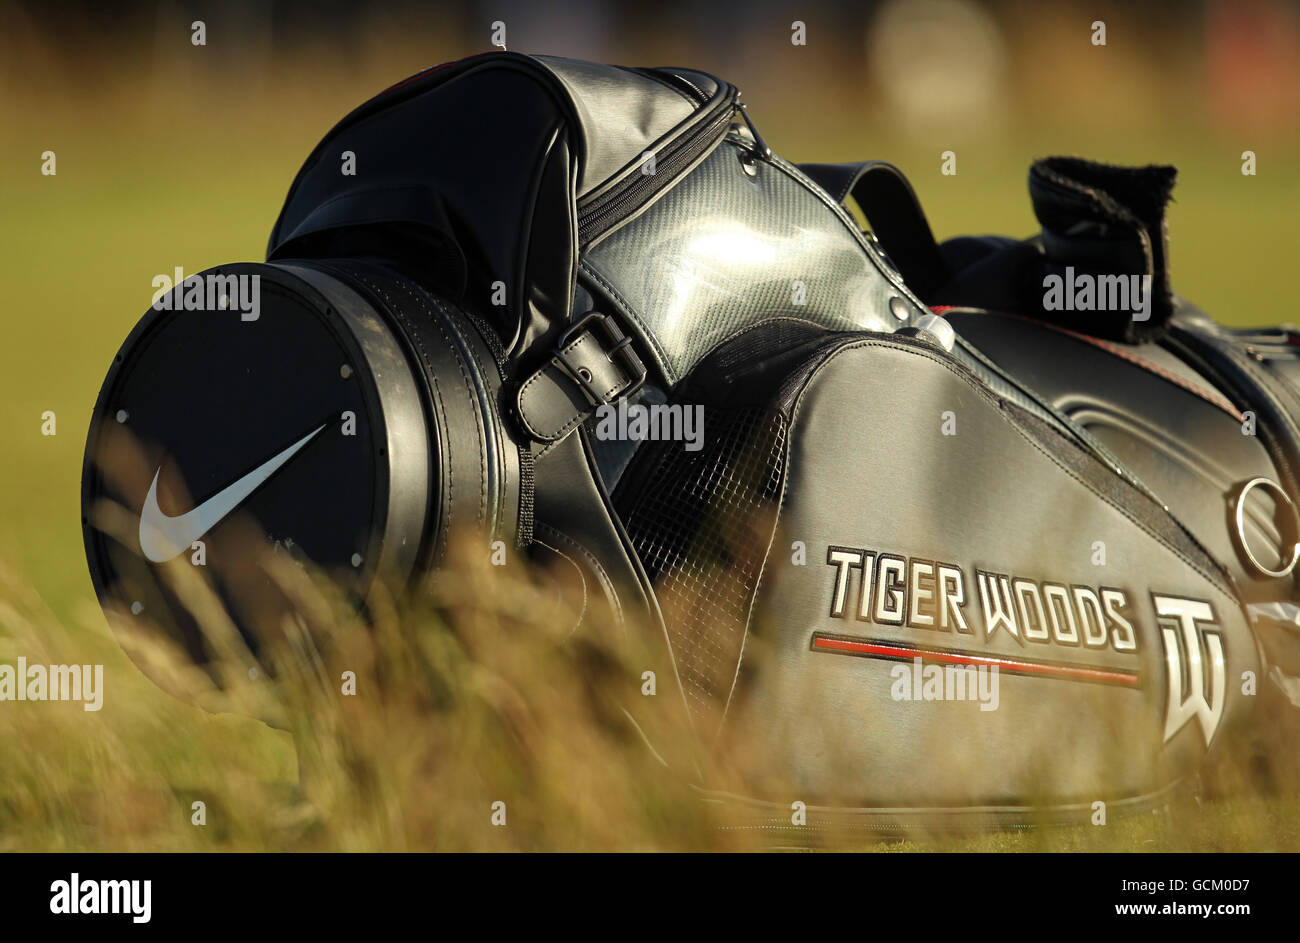 Tiger woods nike High Resolution Stock Photography and Images - Alamy